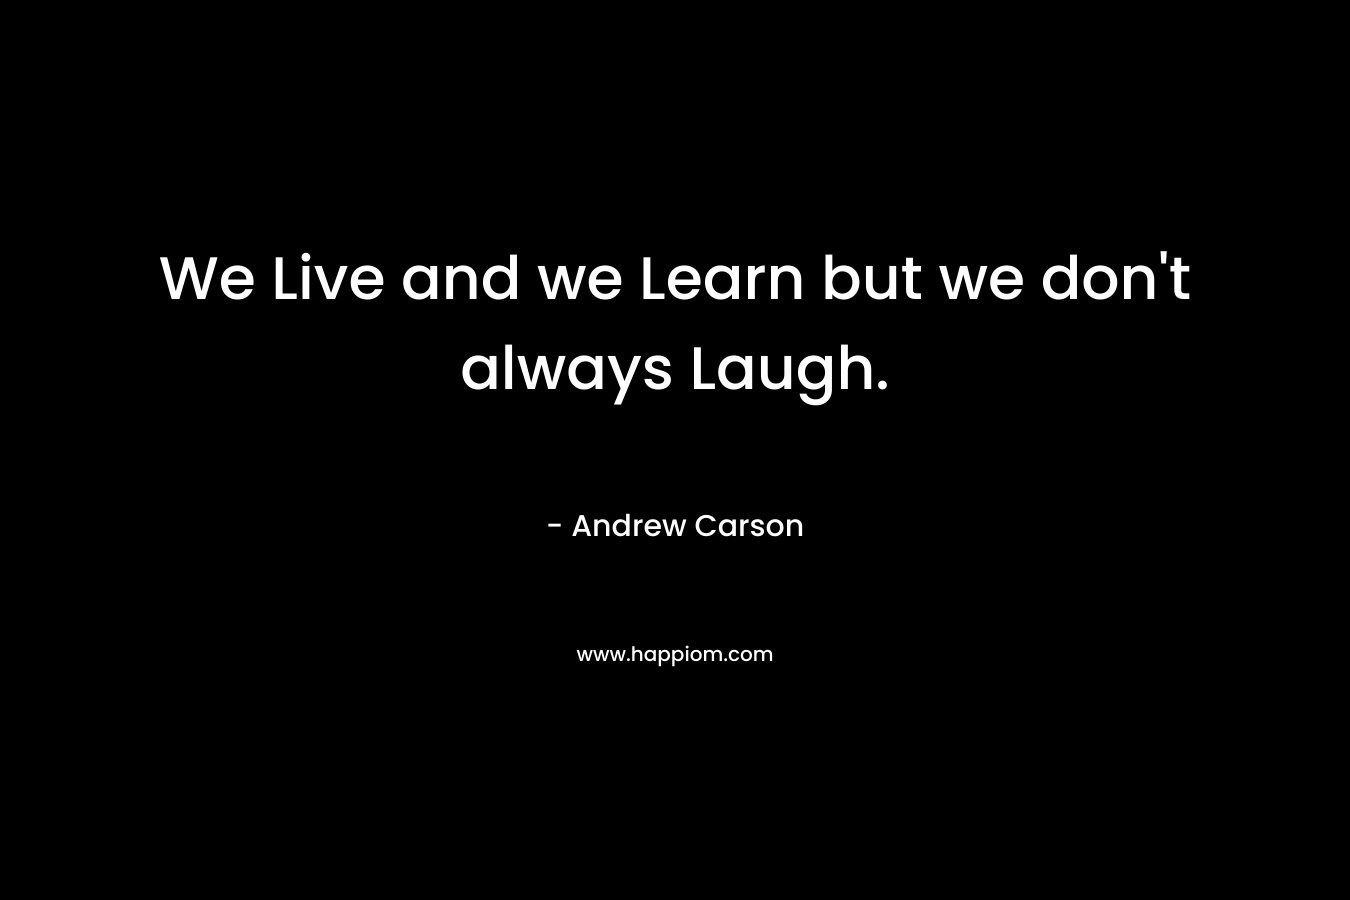 We Live and we Learn but we don't always Laugh.